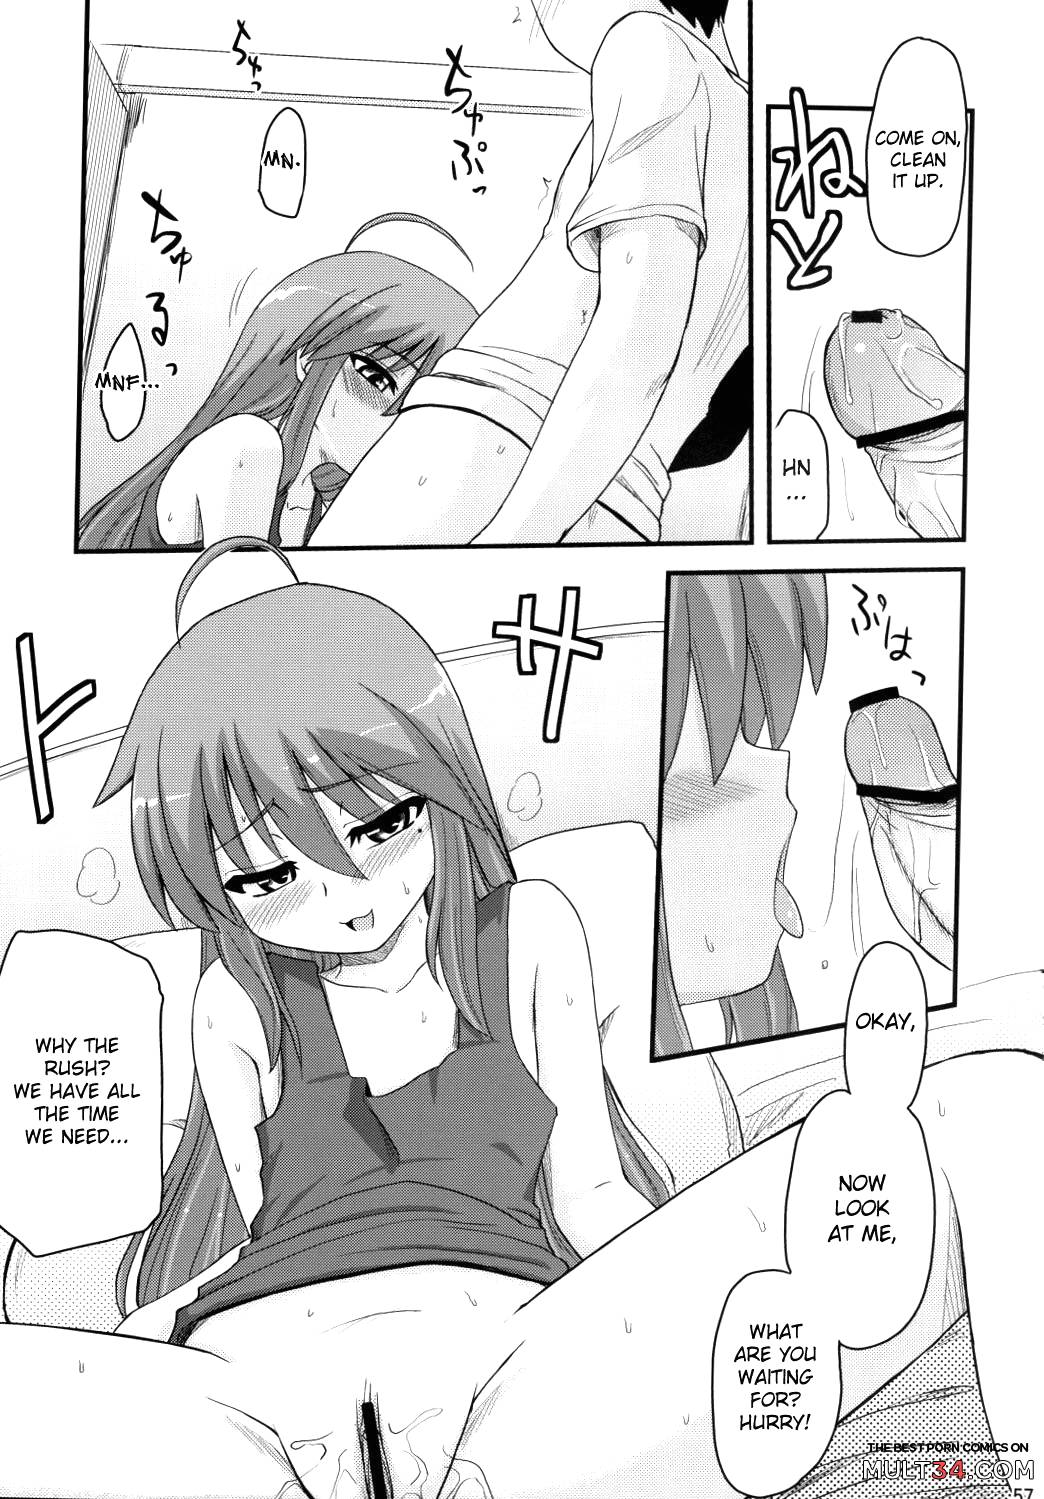 Konata and Oh-zu 4 people each and every one + 1 page 53